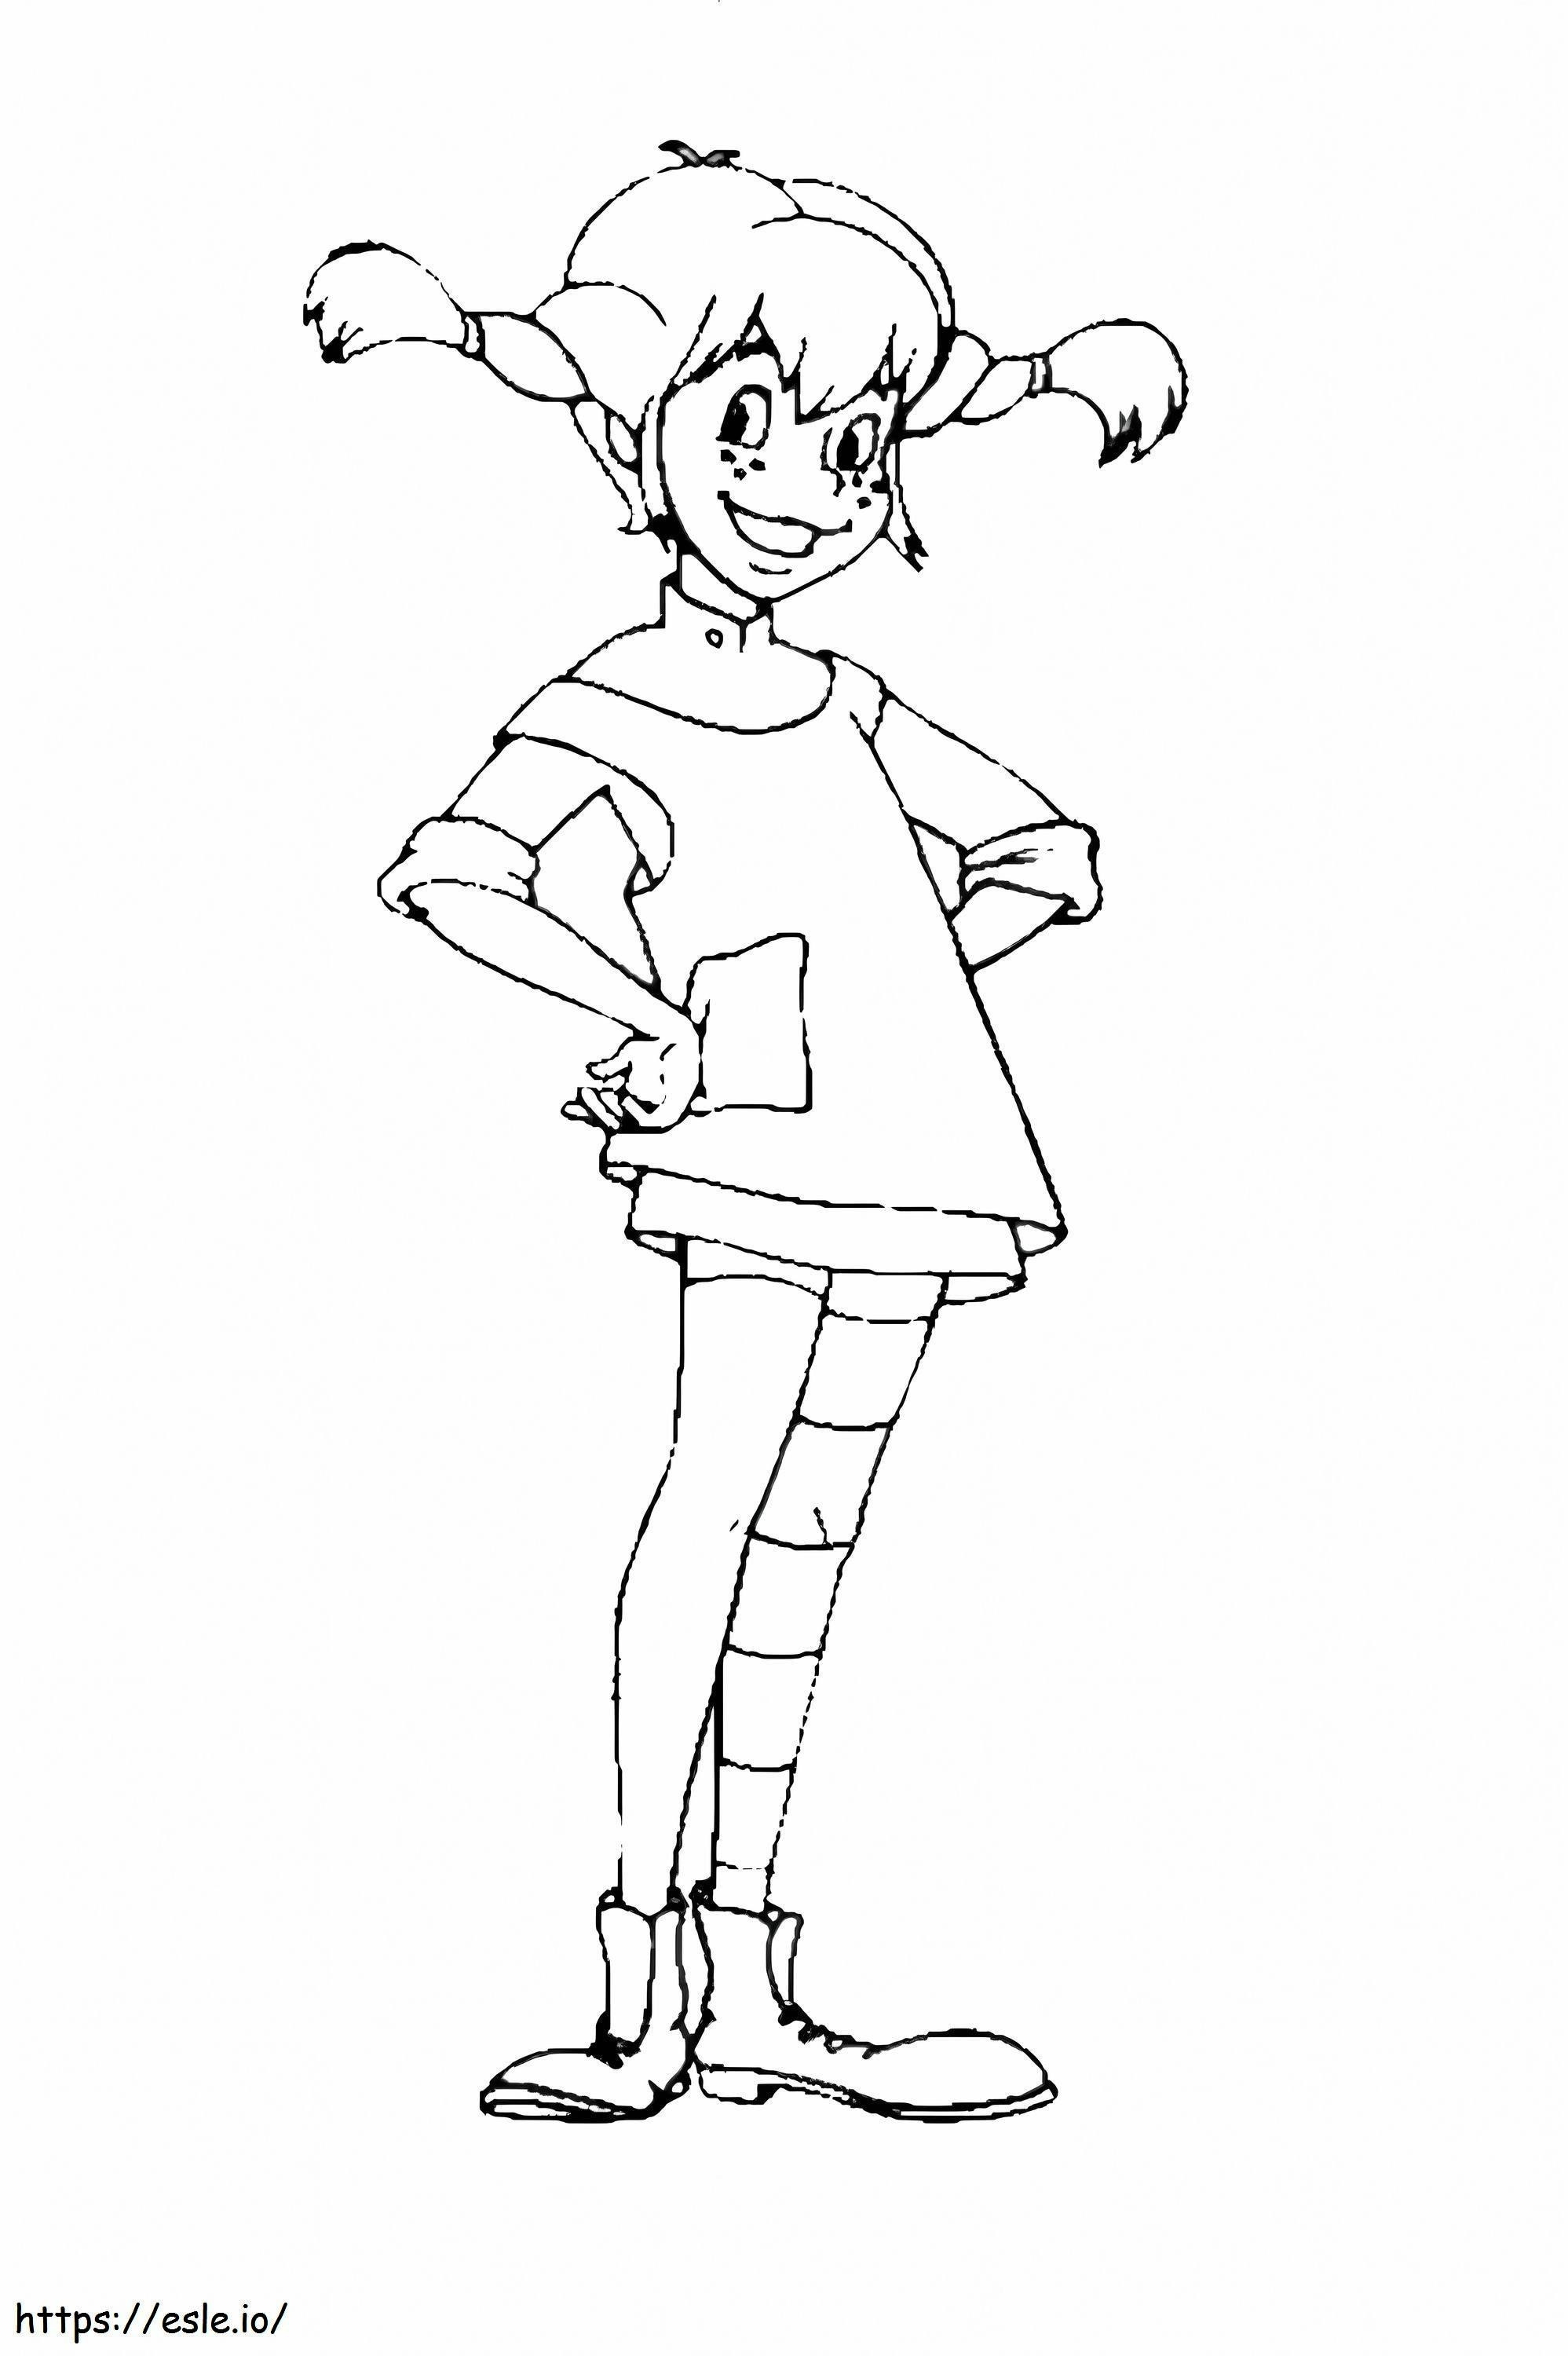 Happy Pippi Longstocking coloring page